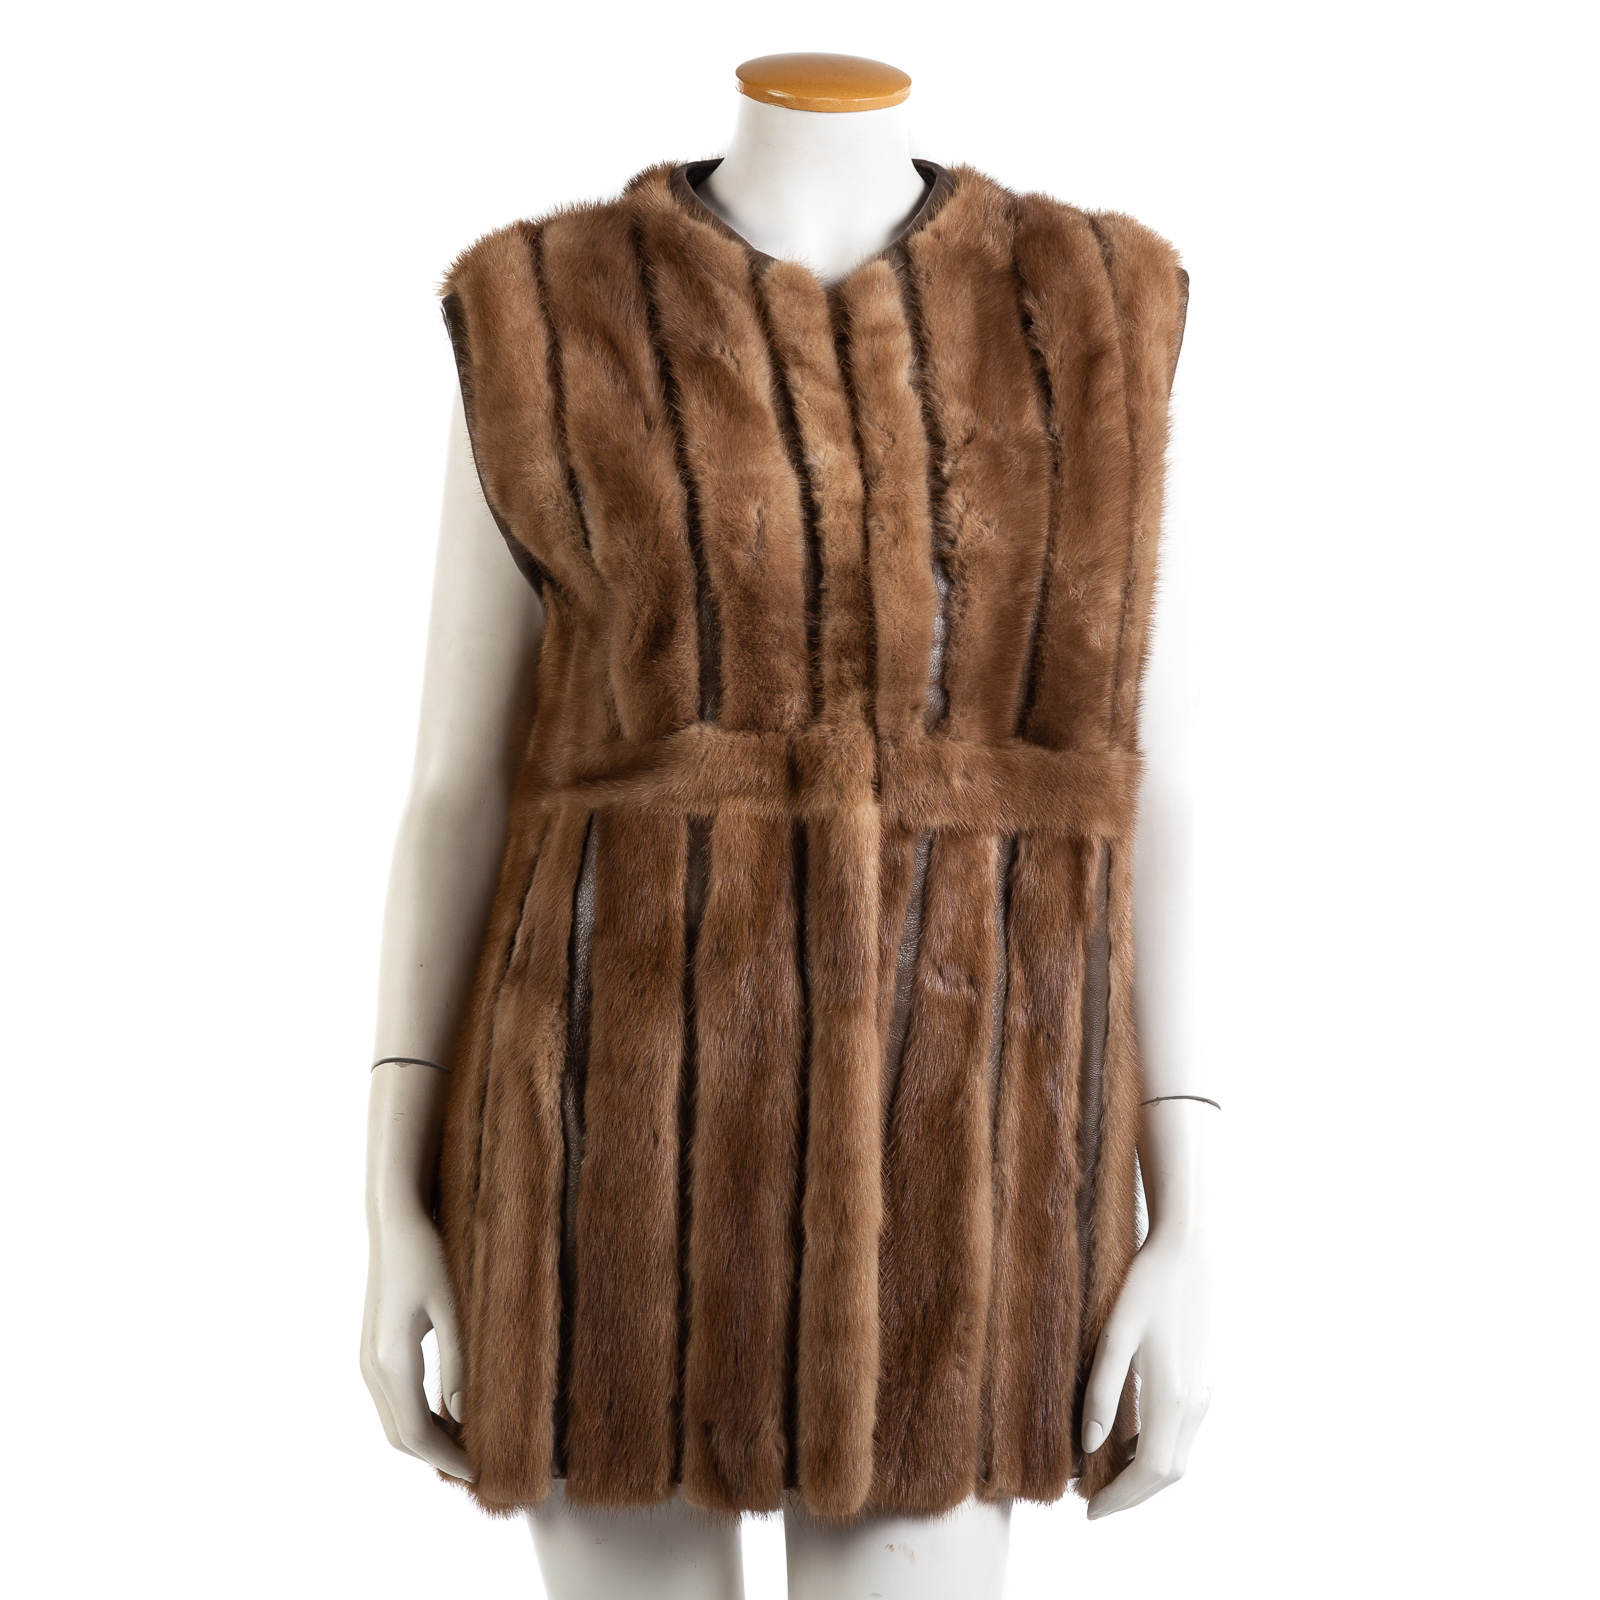 PIERRE WEST MINK AND LEATHER VEST